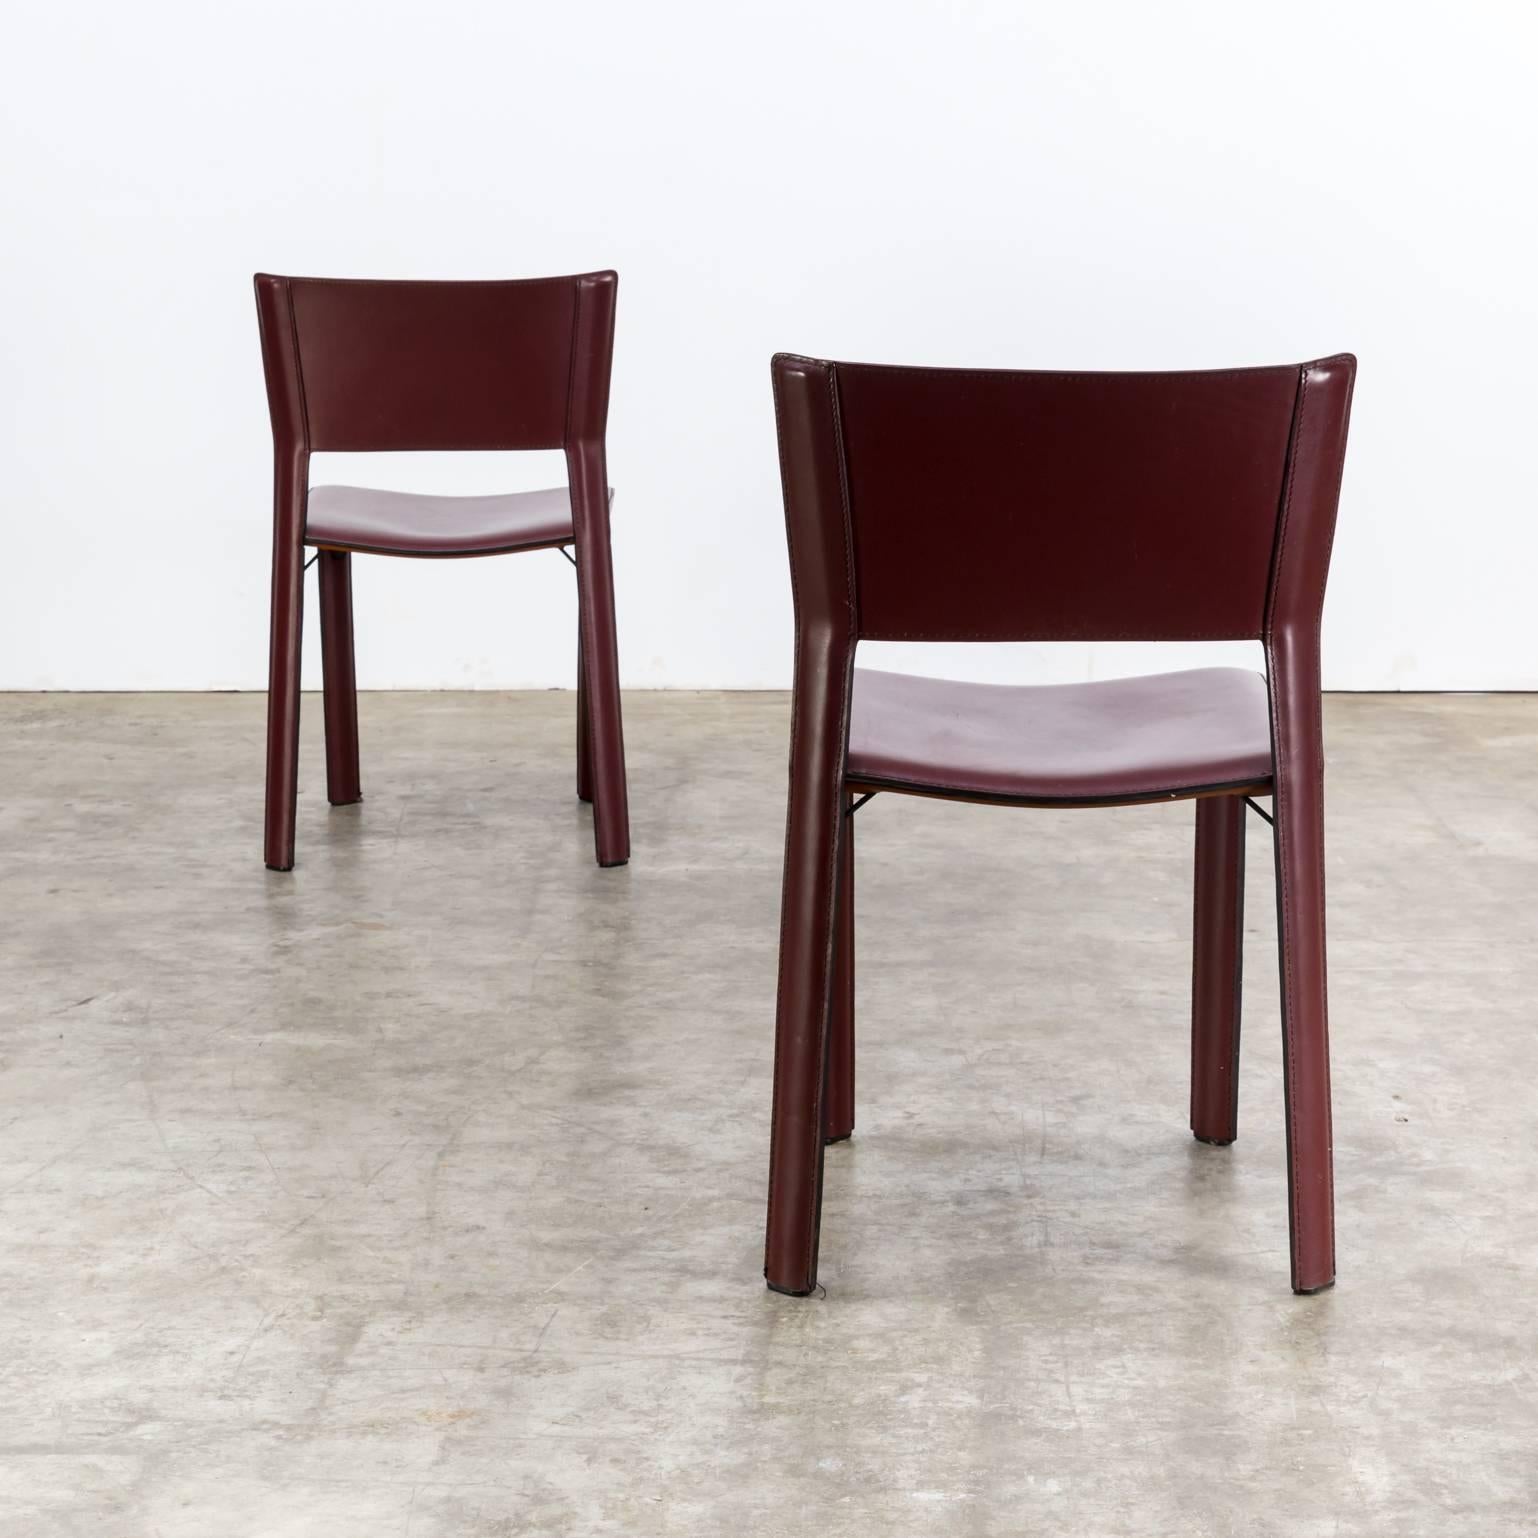 Italian Giancarlo Vegni ‘S91’ Chair for Fasem Italy Set of Two For Sale